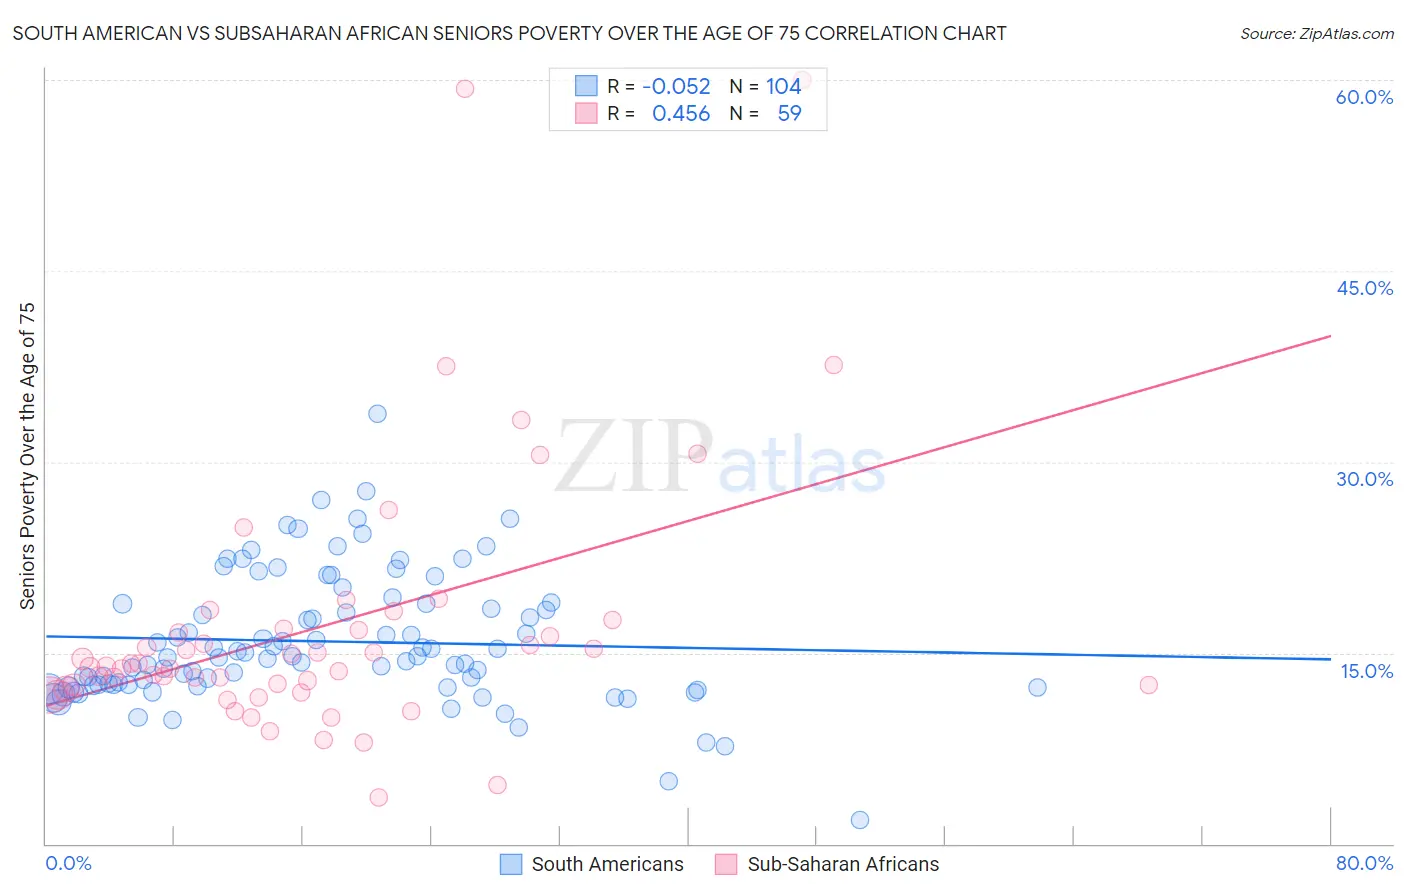 South American vs Subsaharan African Seniors Poverty Over the Age of 75